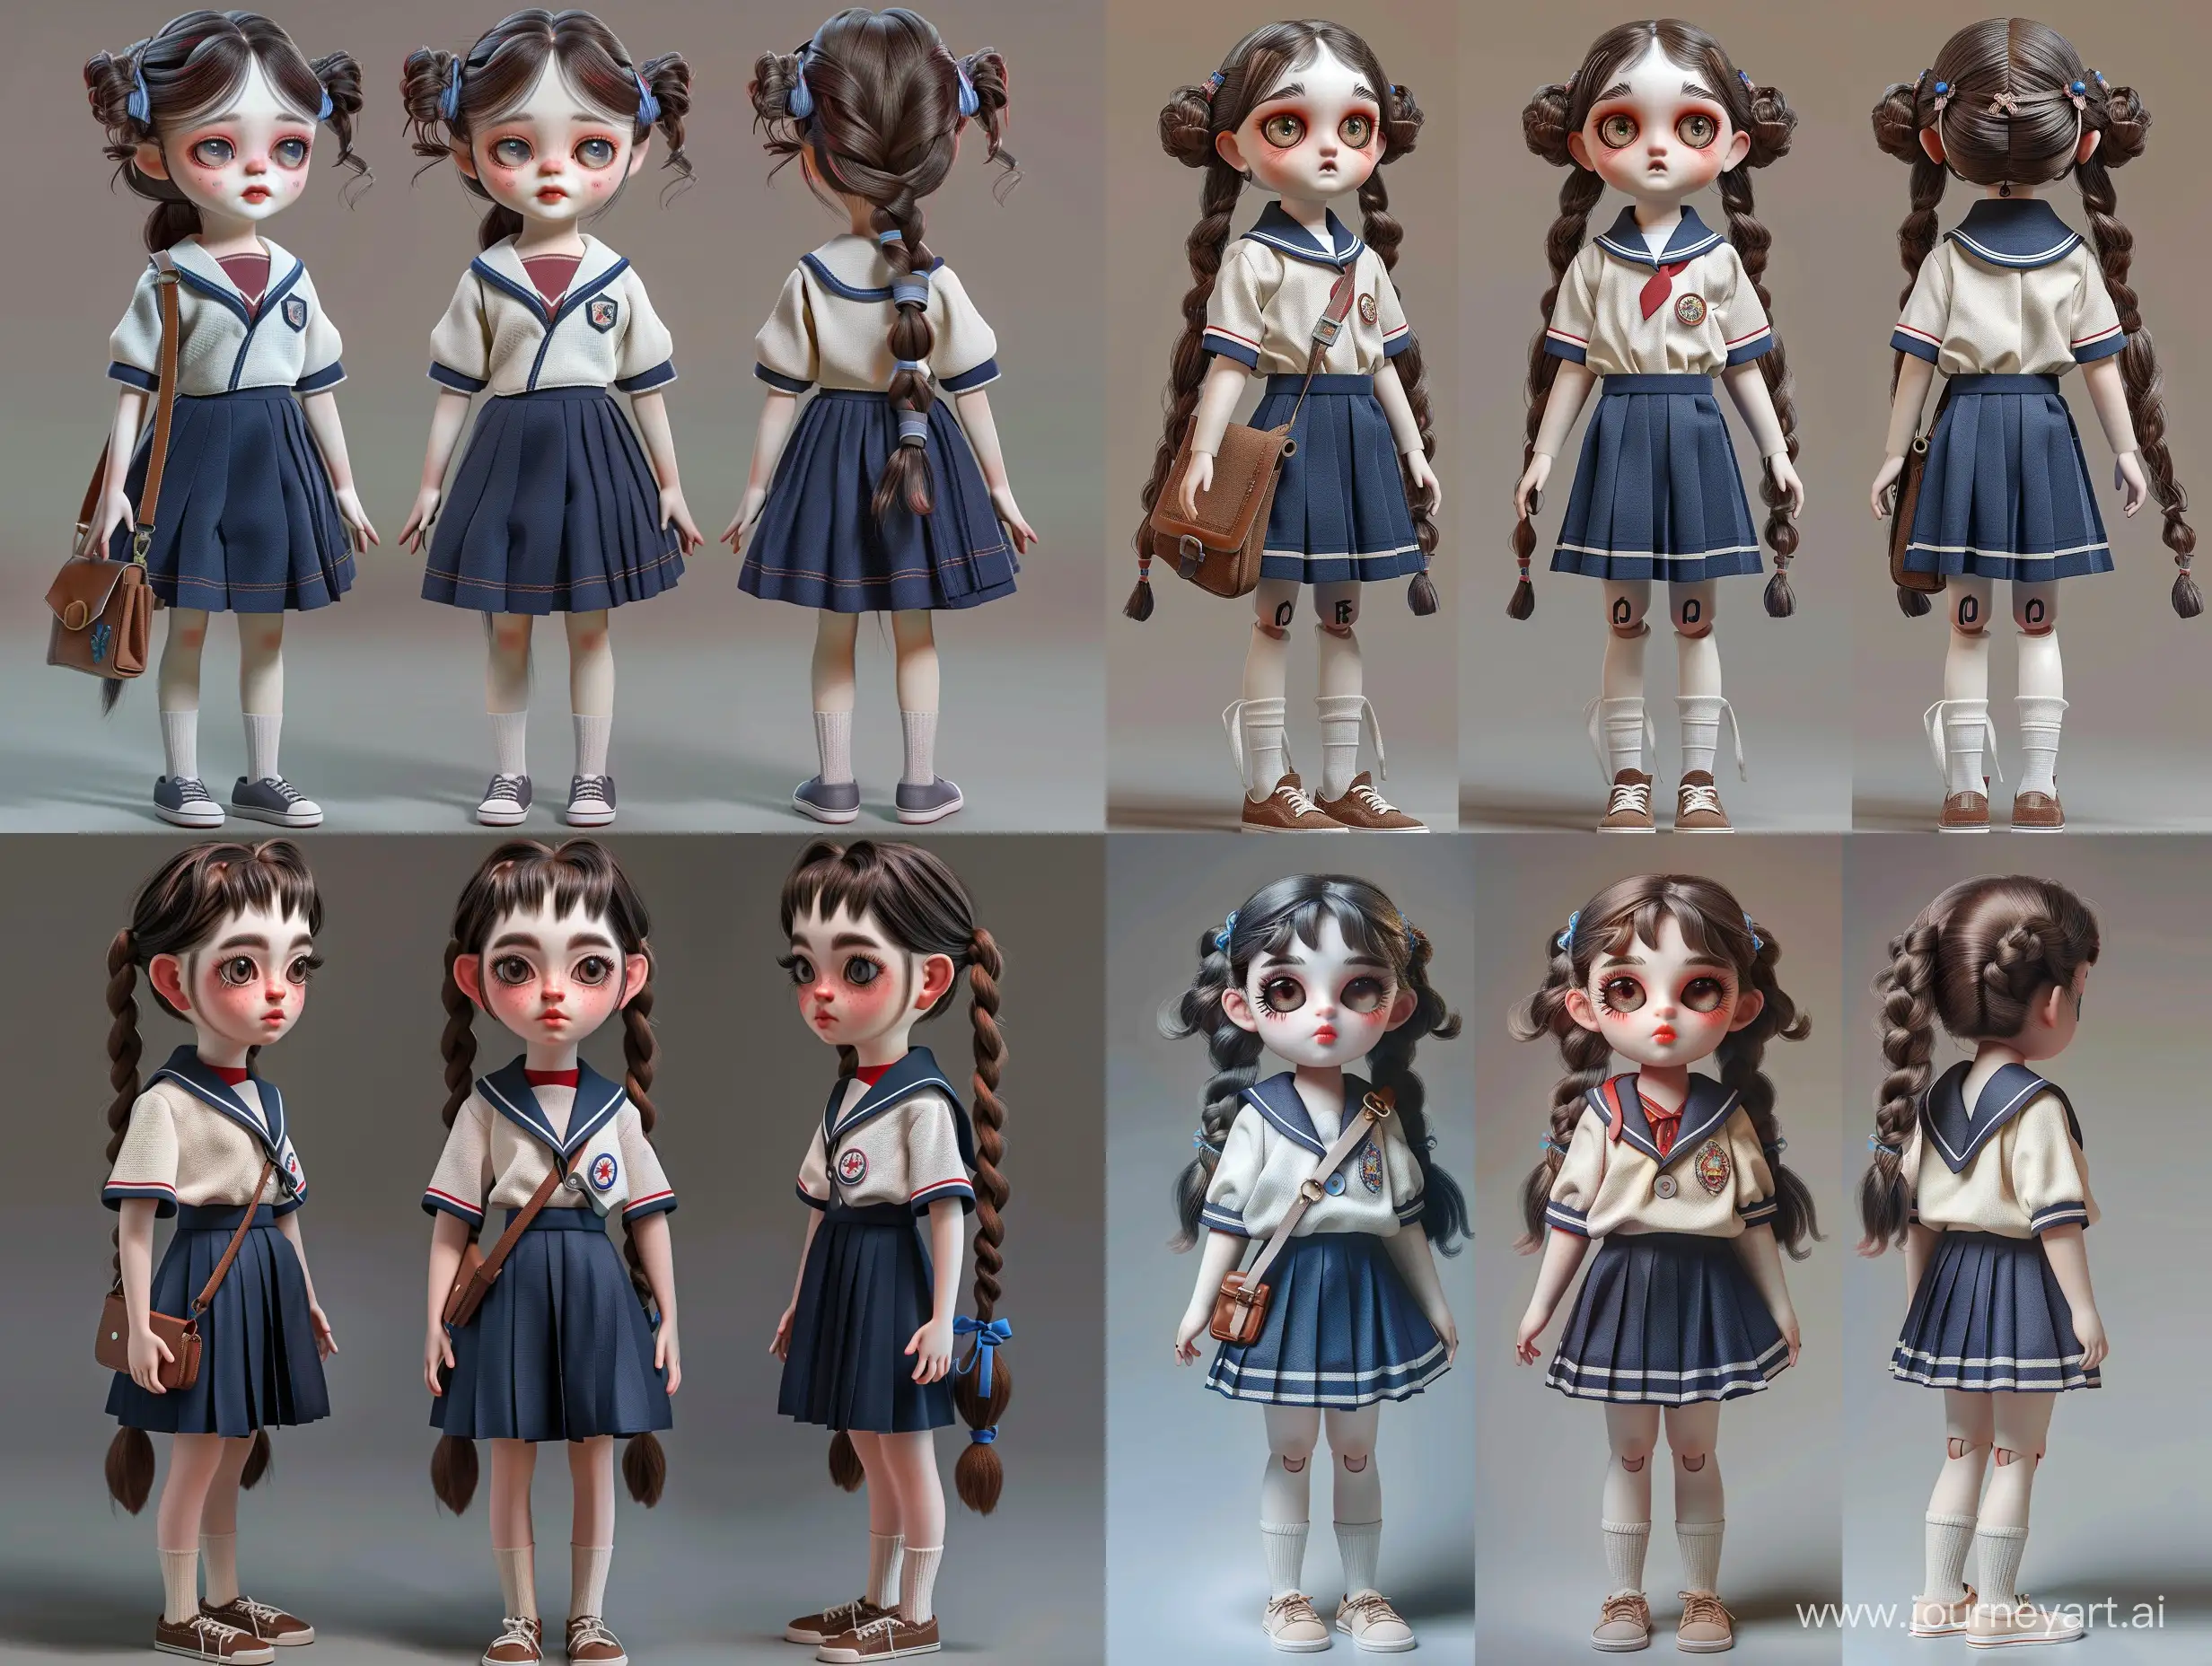 Create image of a three-dimensional, stylized, child-like doll character presented in three different poses showcasing front, three-quarter, and side profiles. The character exhibits exaggerated, large eyes, and a small mouth, reflecting typical features of East Asian animation-inspired aesthetics. It has pale skin and wears light makeup with blush and defined eyelashes. The character has long, dark brown hair styled into two braids with loose strands framing the face and secured with small, blue hair ties.   The character is dressed in a traditional school uniform consisting of a white blouse with a sailor-style collar edged in navy blue and a red neckerchief. The blouse has a chest patch on the left side. The character also wears a pleated, navy blue skirt that sits at mid-thigh length.   Accessories include a brown crossbody bag with noticeable buckles and straps, worn over the shoulder in the front and side profiles and hanging in the back in the three-quarter pose. The character is also adorned with what appears to be white crew socks and classic, white lace-up sneakers with dark soles and laces.   The background is a neutral, smooth gradient shifting subtly from grey at the bottom to a lighter shade at the top, drawing focus to the character and allowing for a clear view of the details. The lighting is soft and evenly diffused, casting subtle shadows and giving the character a soft, matte finish without harsh reflections.